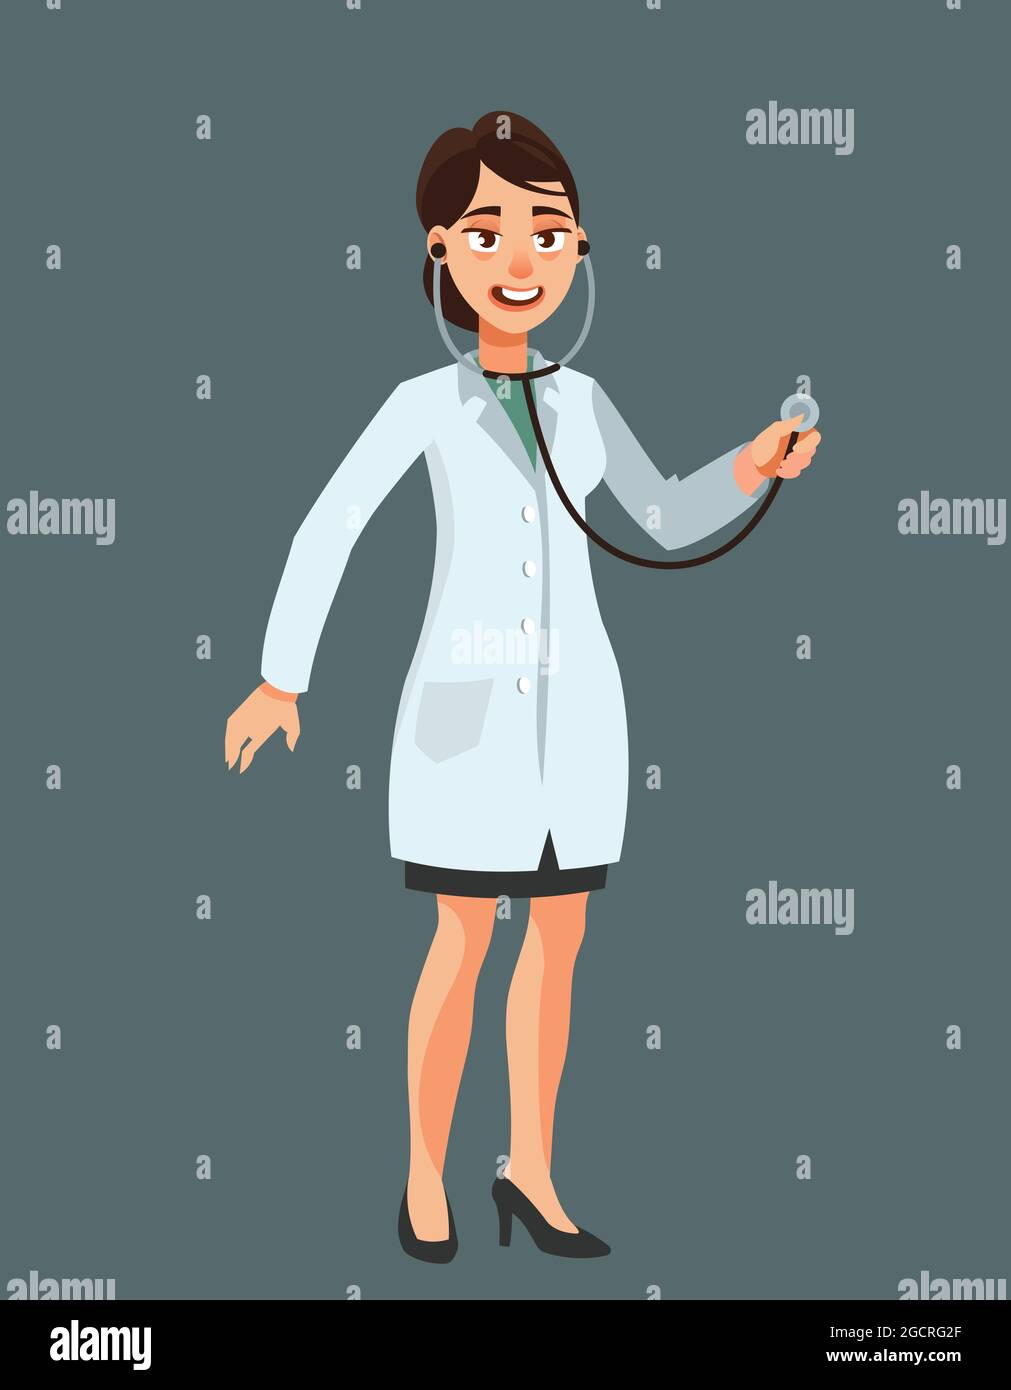 Female doctor holding stethoscope. Woman in cartoon style Stock Vector  Image & Art - Alamy